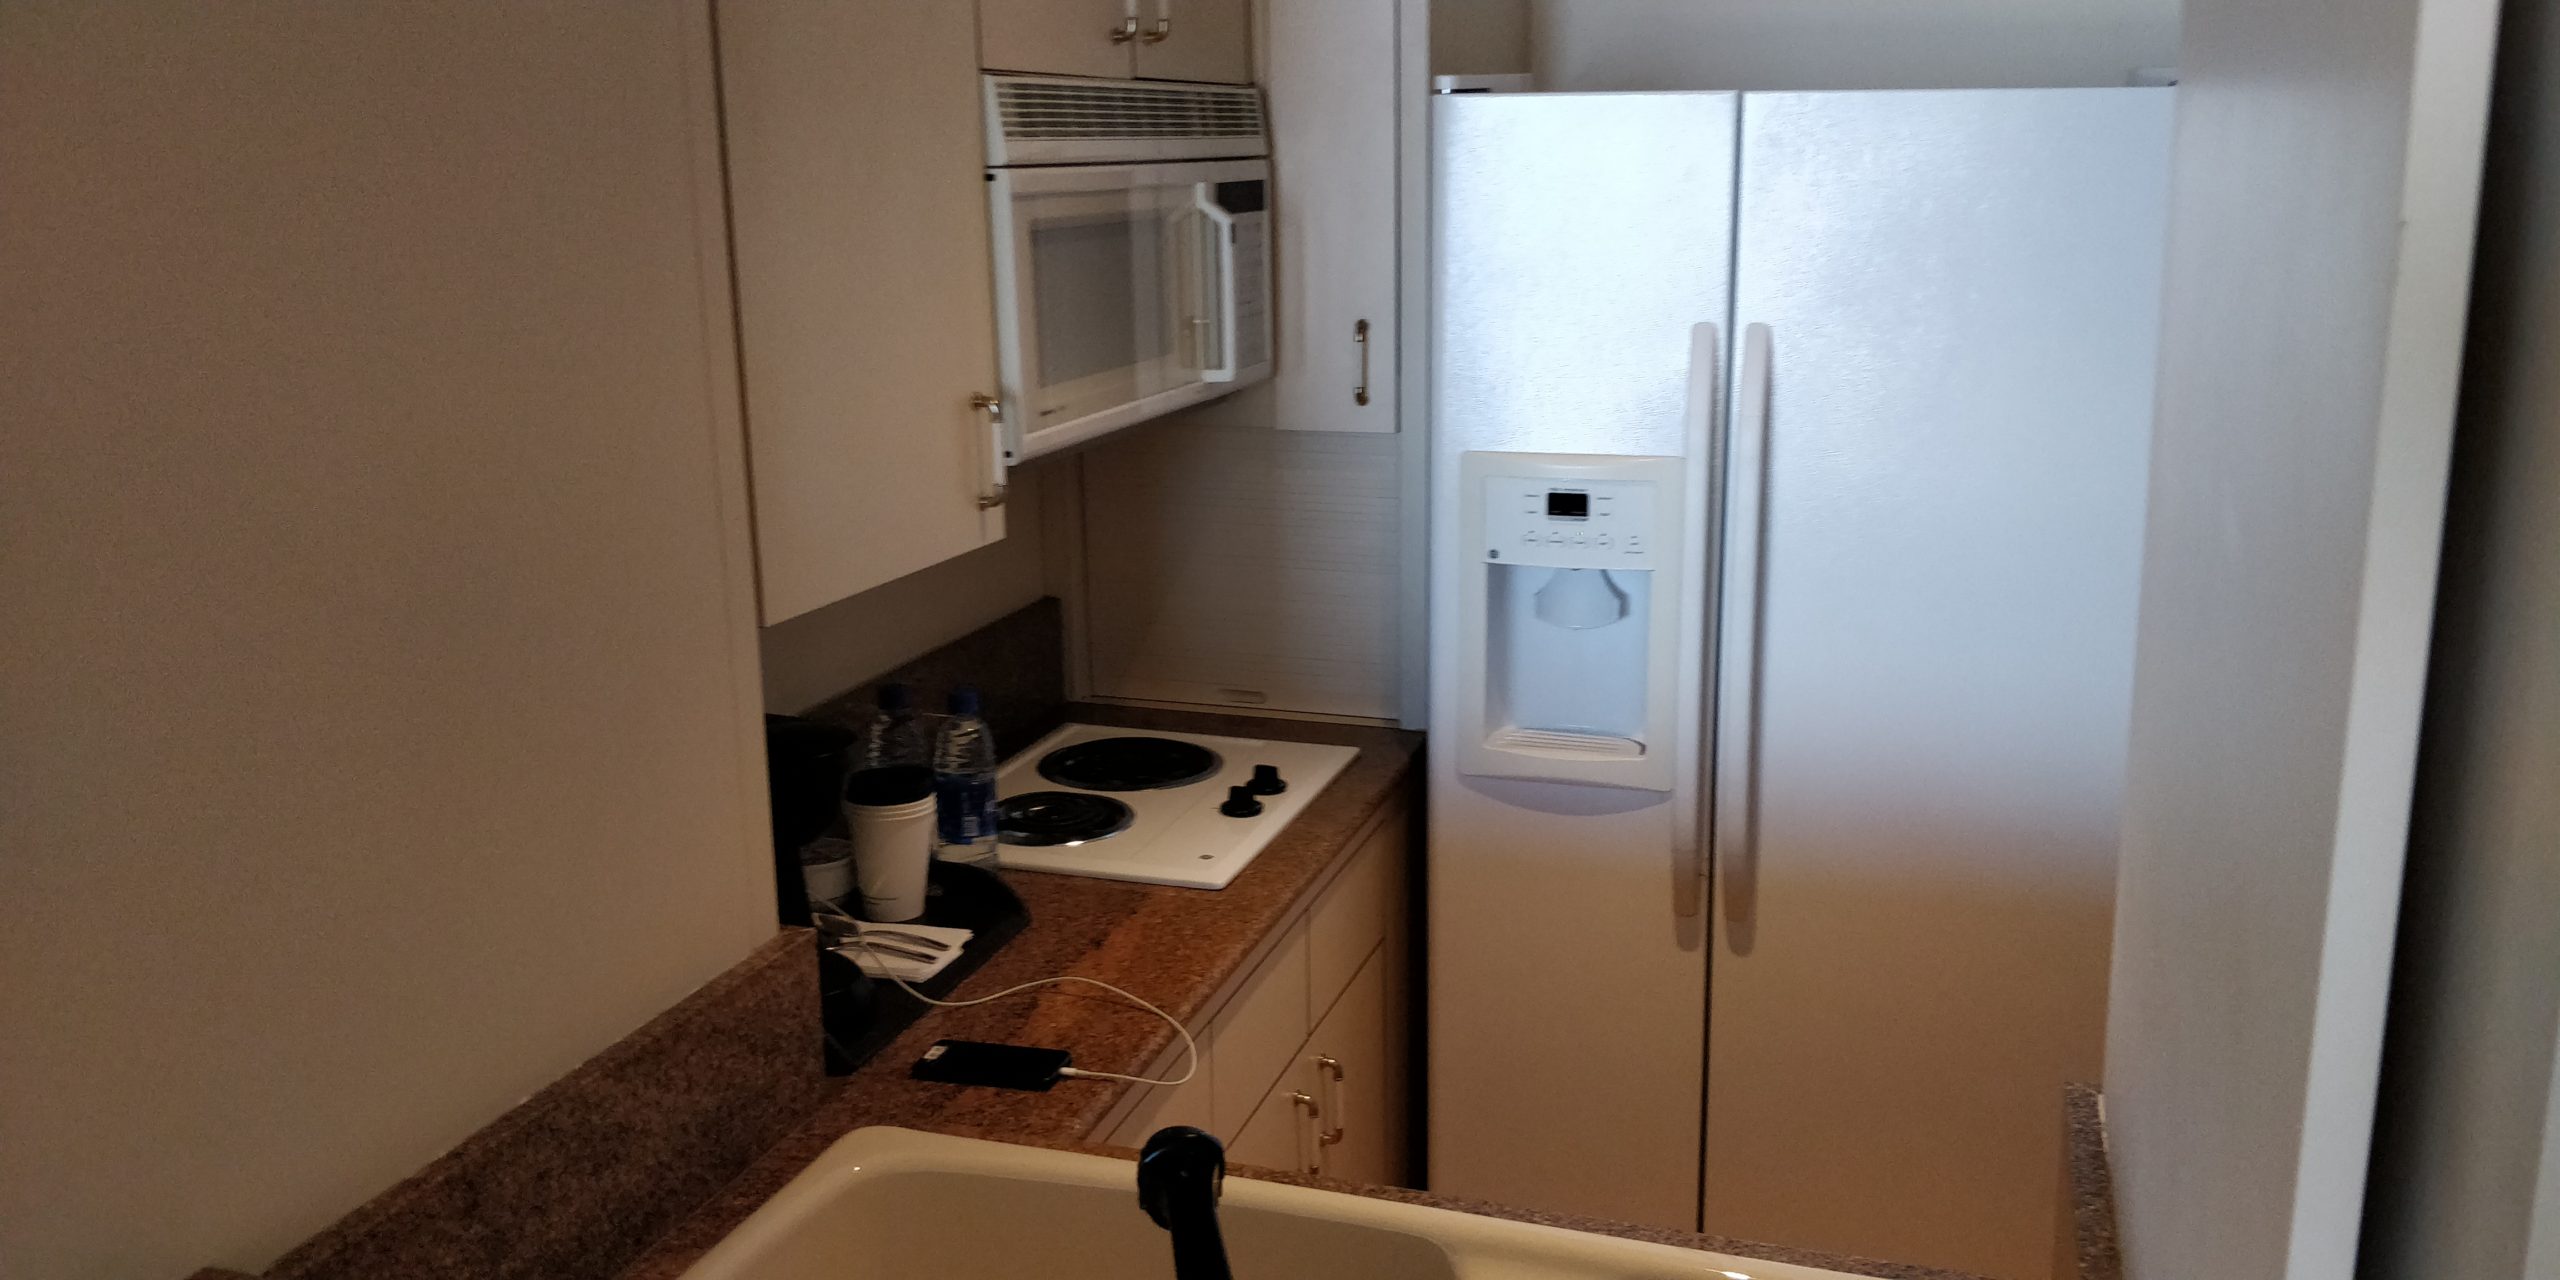 PICTURE OF THE  KITCHENETTE